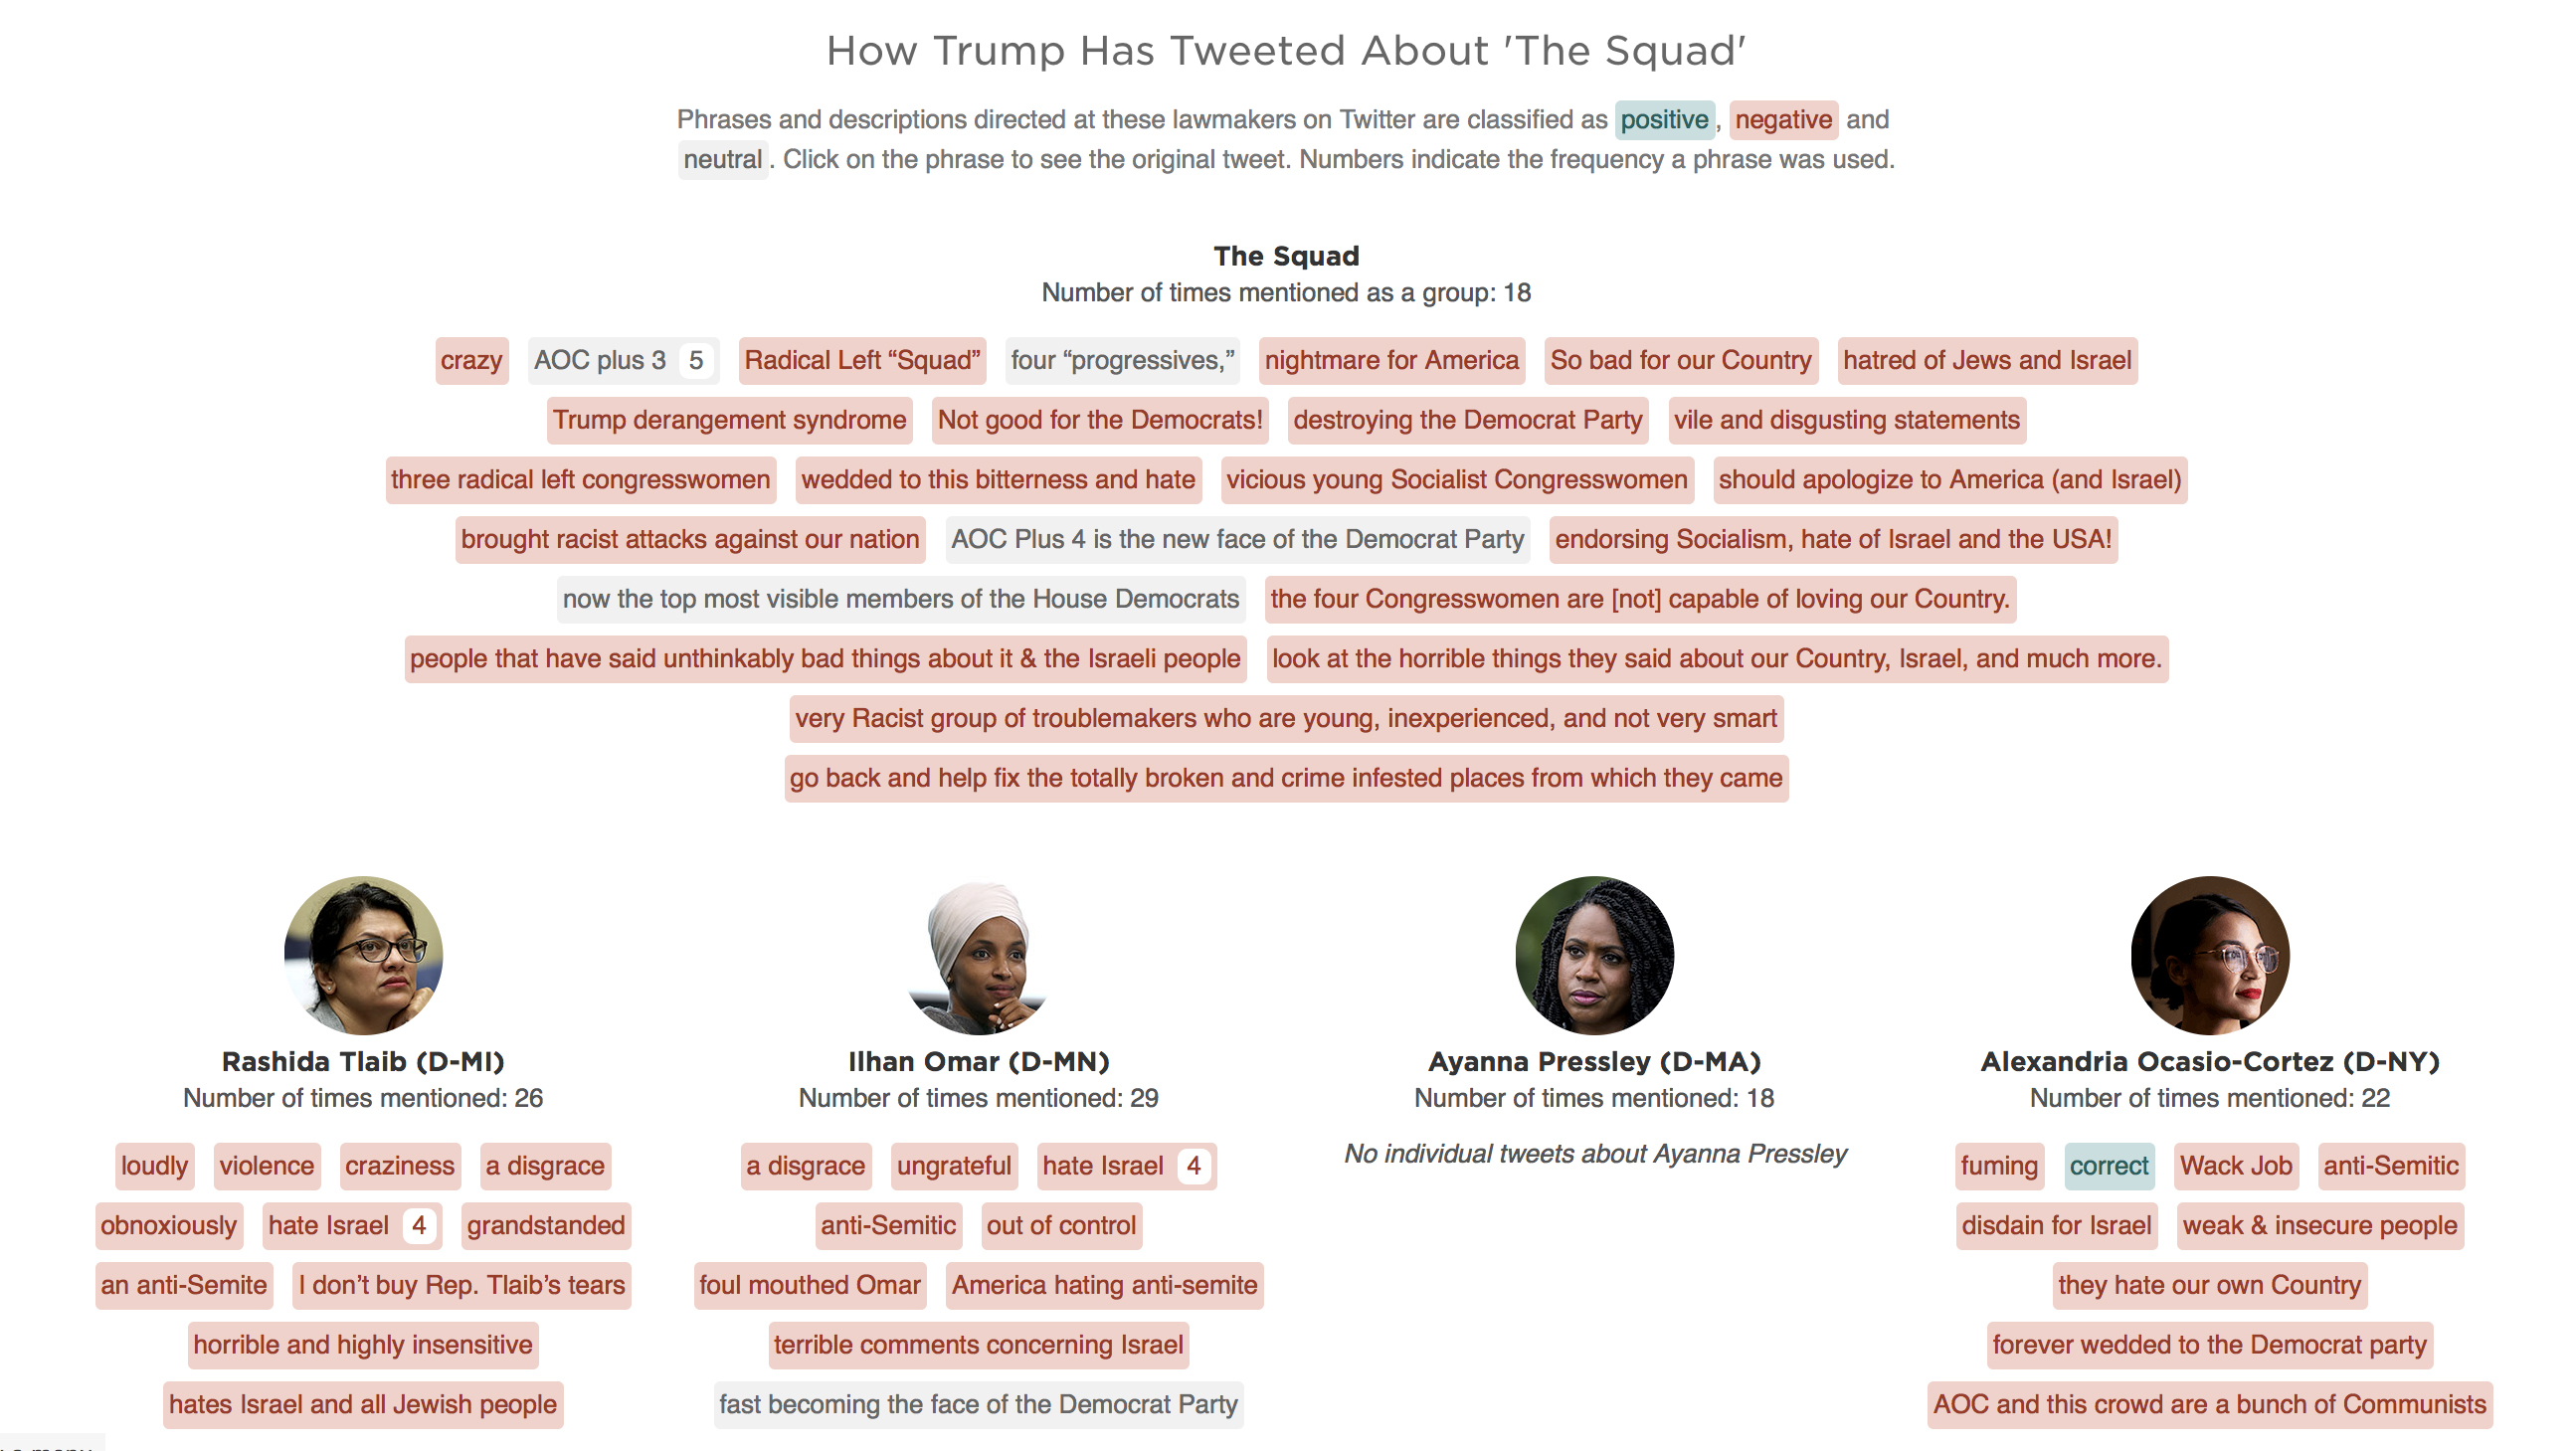 Note: The tweet excerpts shown here are verbatim selections from Donald Trump's tweets. There may be other tweets referencing these individuals that are not shown.  Photos: Win McNamee/Getty Images (Tlaib); Chip Somodevilla/Getty Images (Omar); 